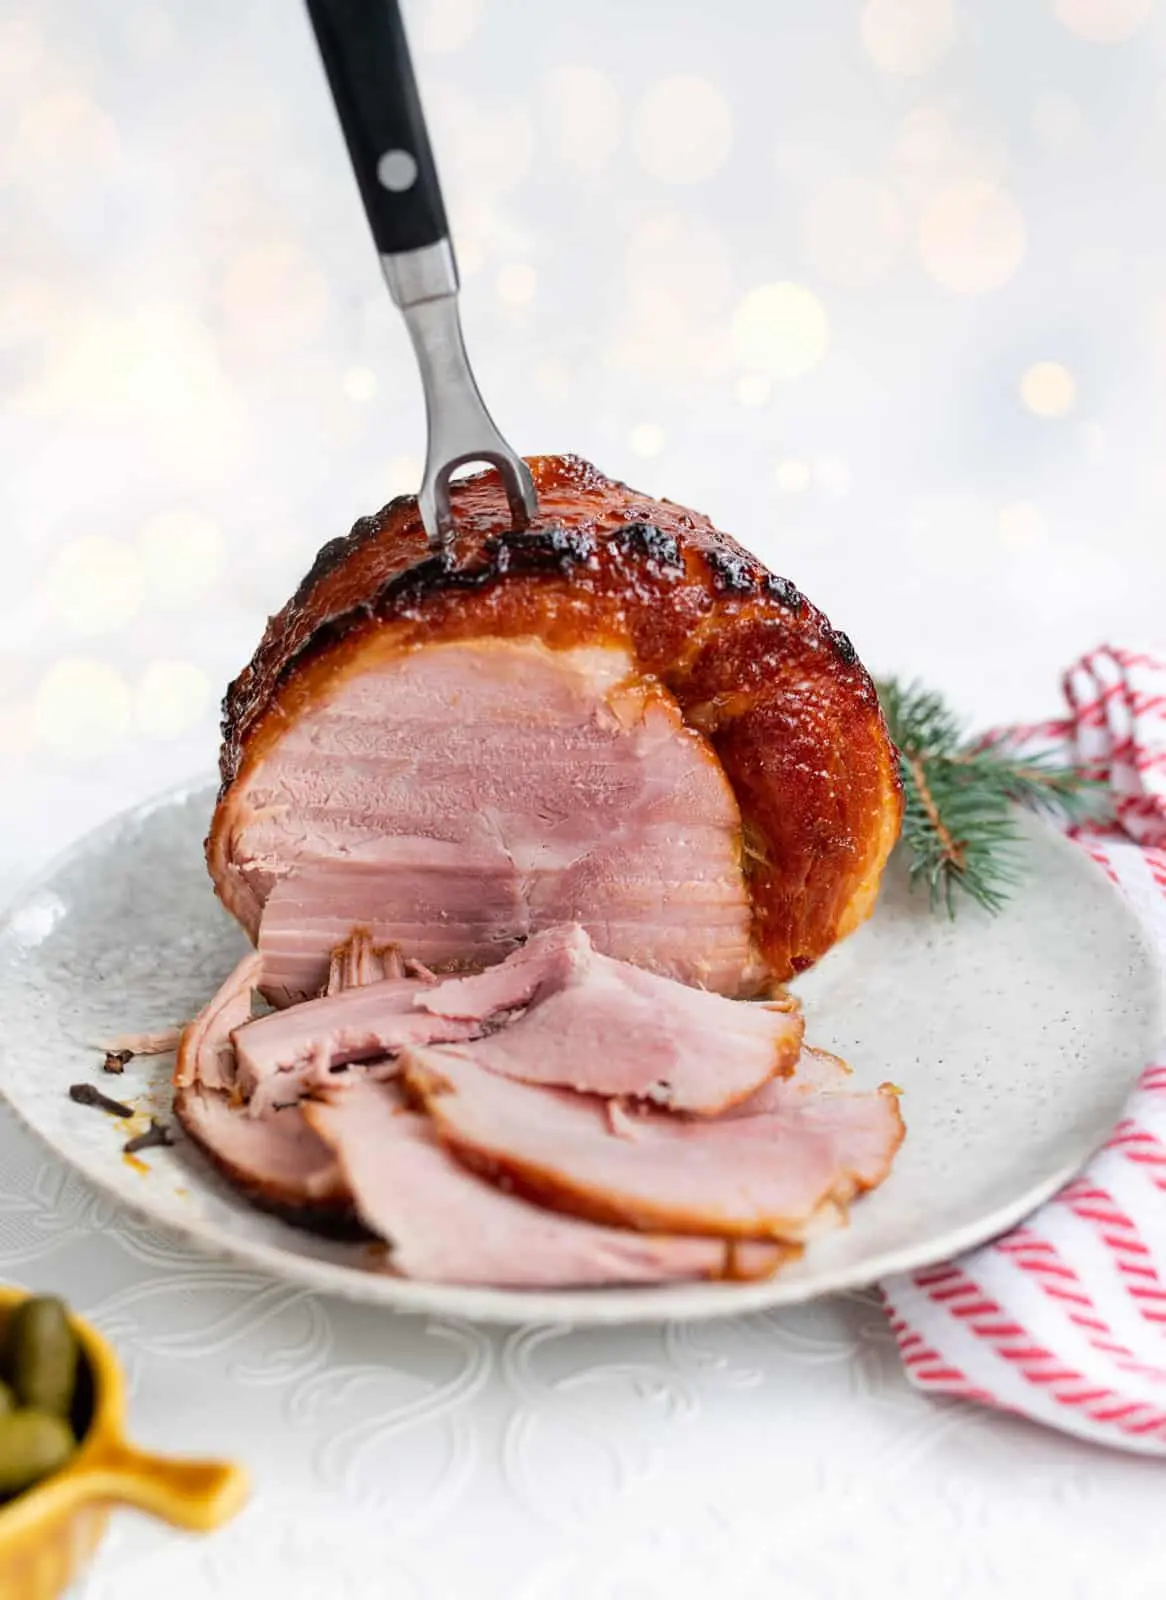 how to cook smoked gammon in slow cooker - Can you cook gammon in slow cooker with plastic on